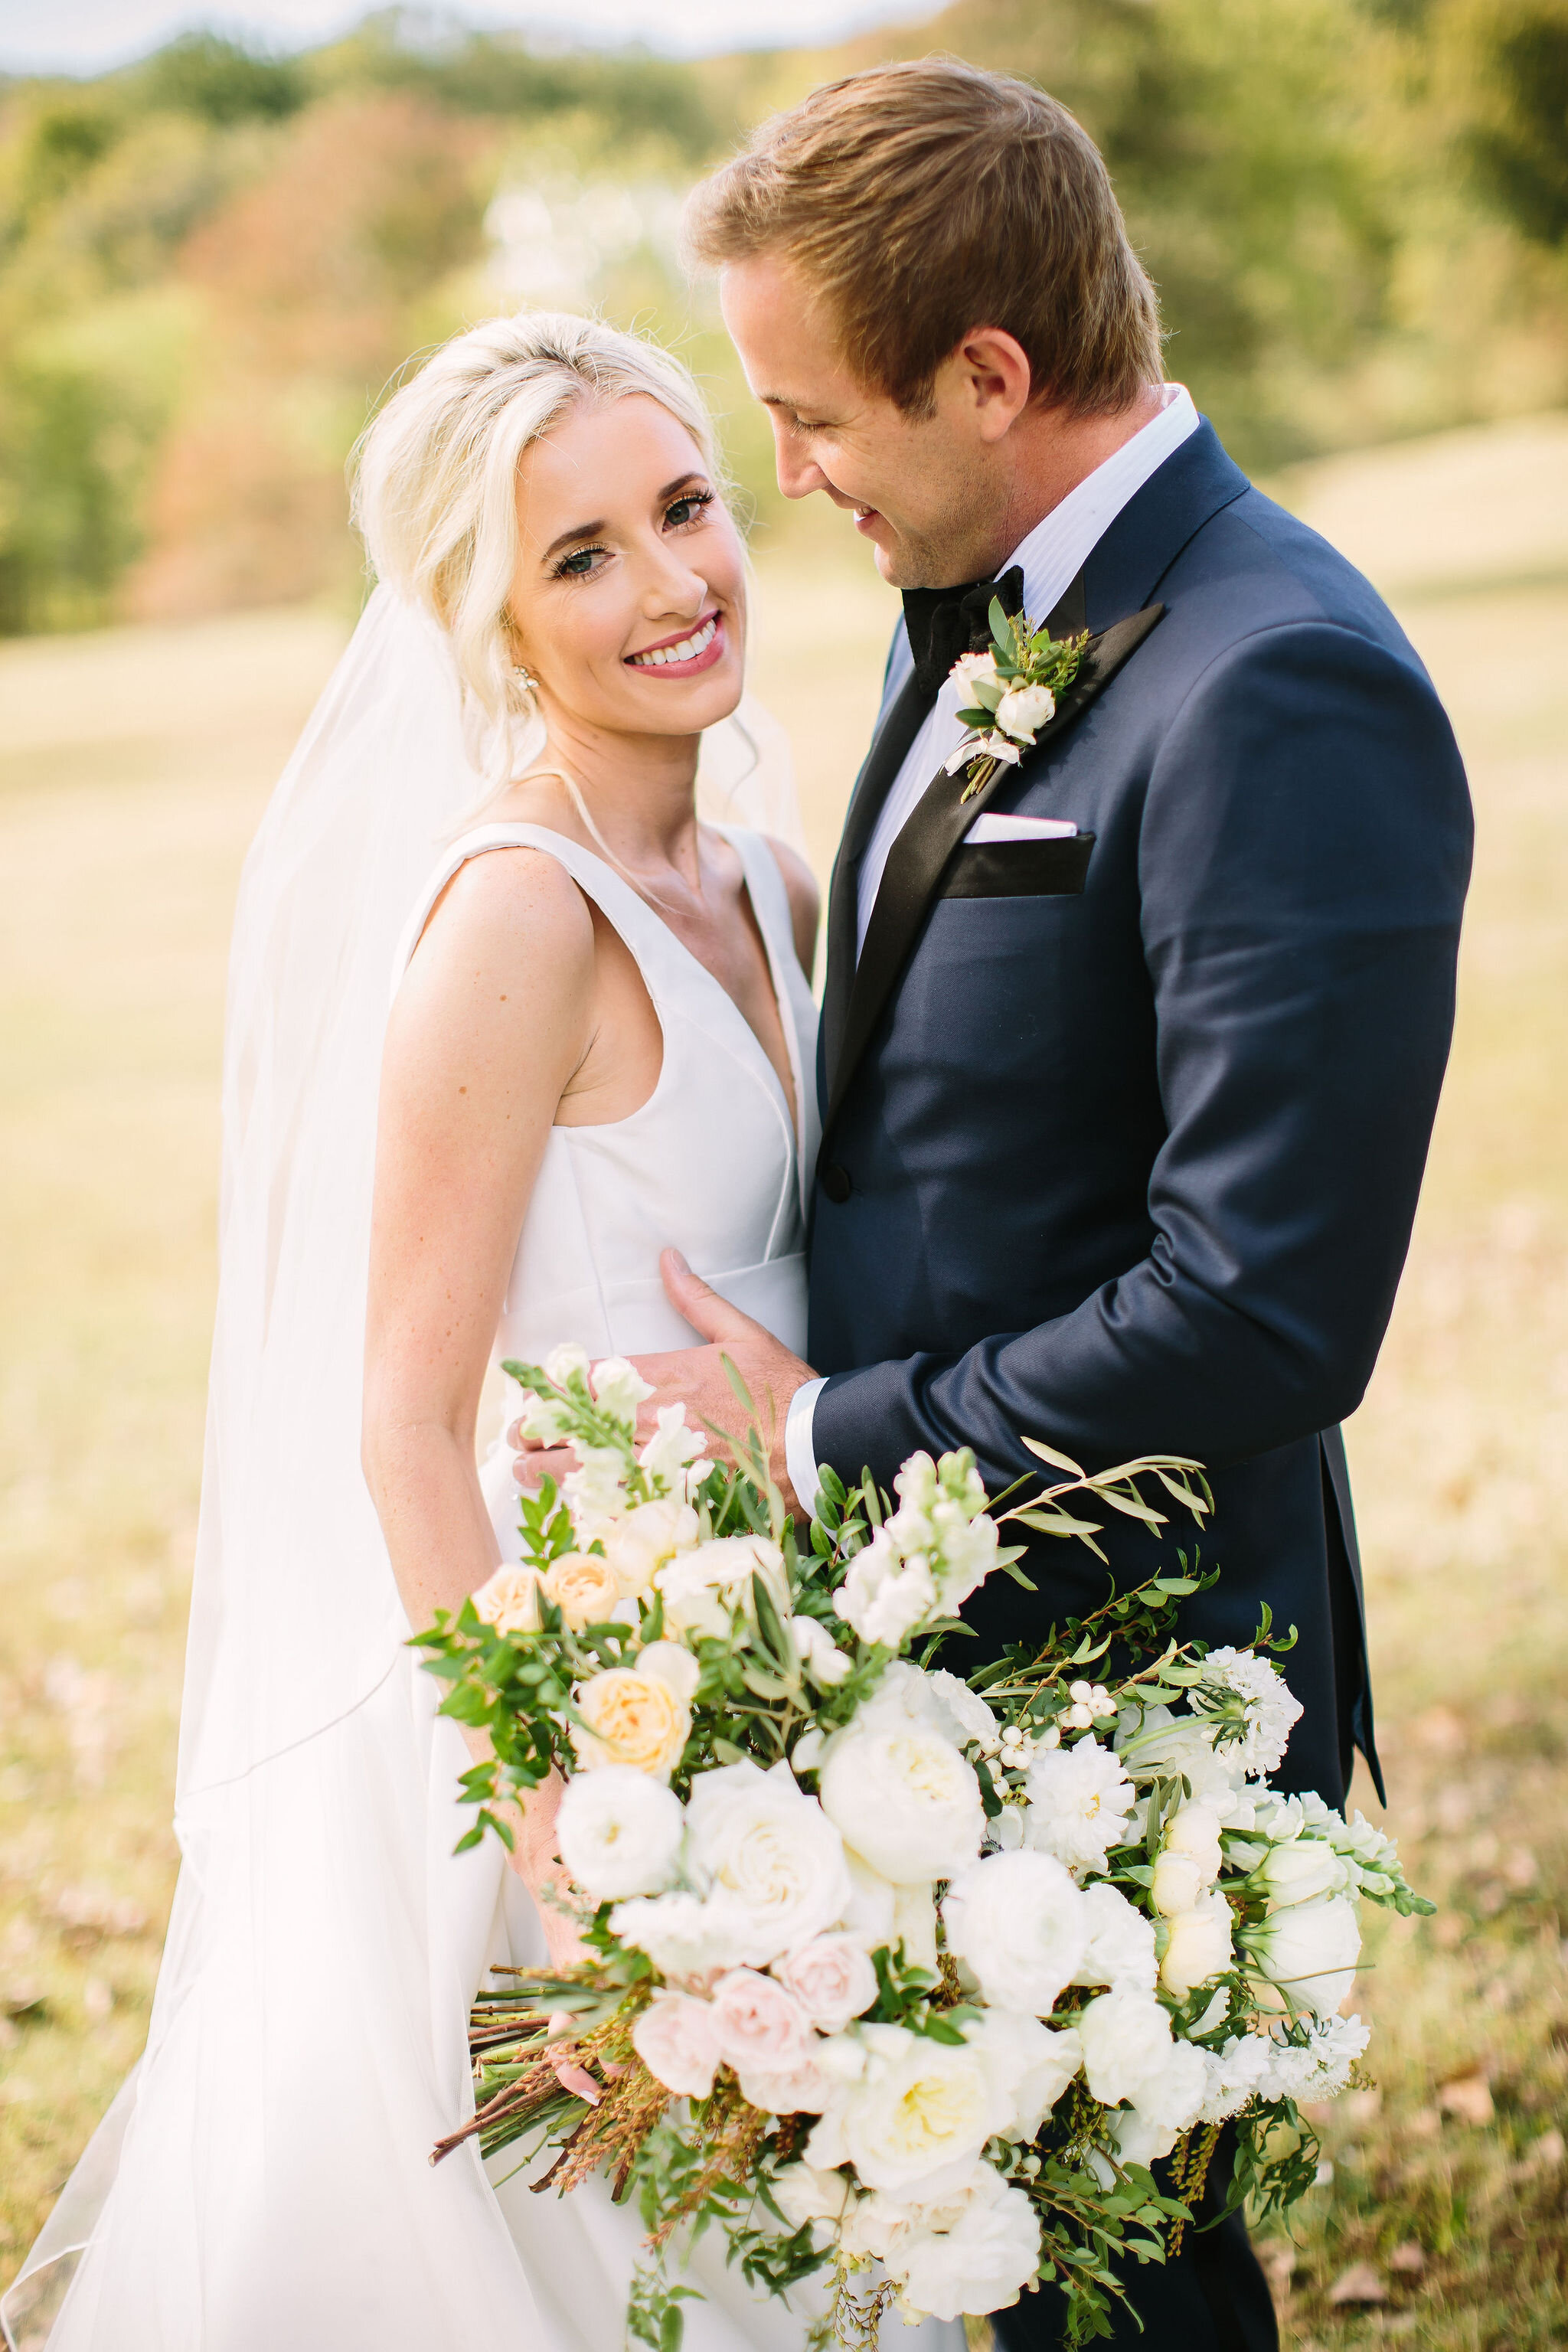 Tennessee countryside October wedding at Bloomsberry Farm with all white and greenery floral design. Nashville wedding florist.